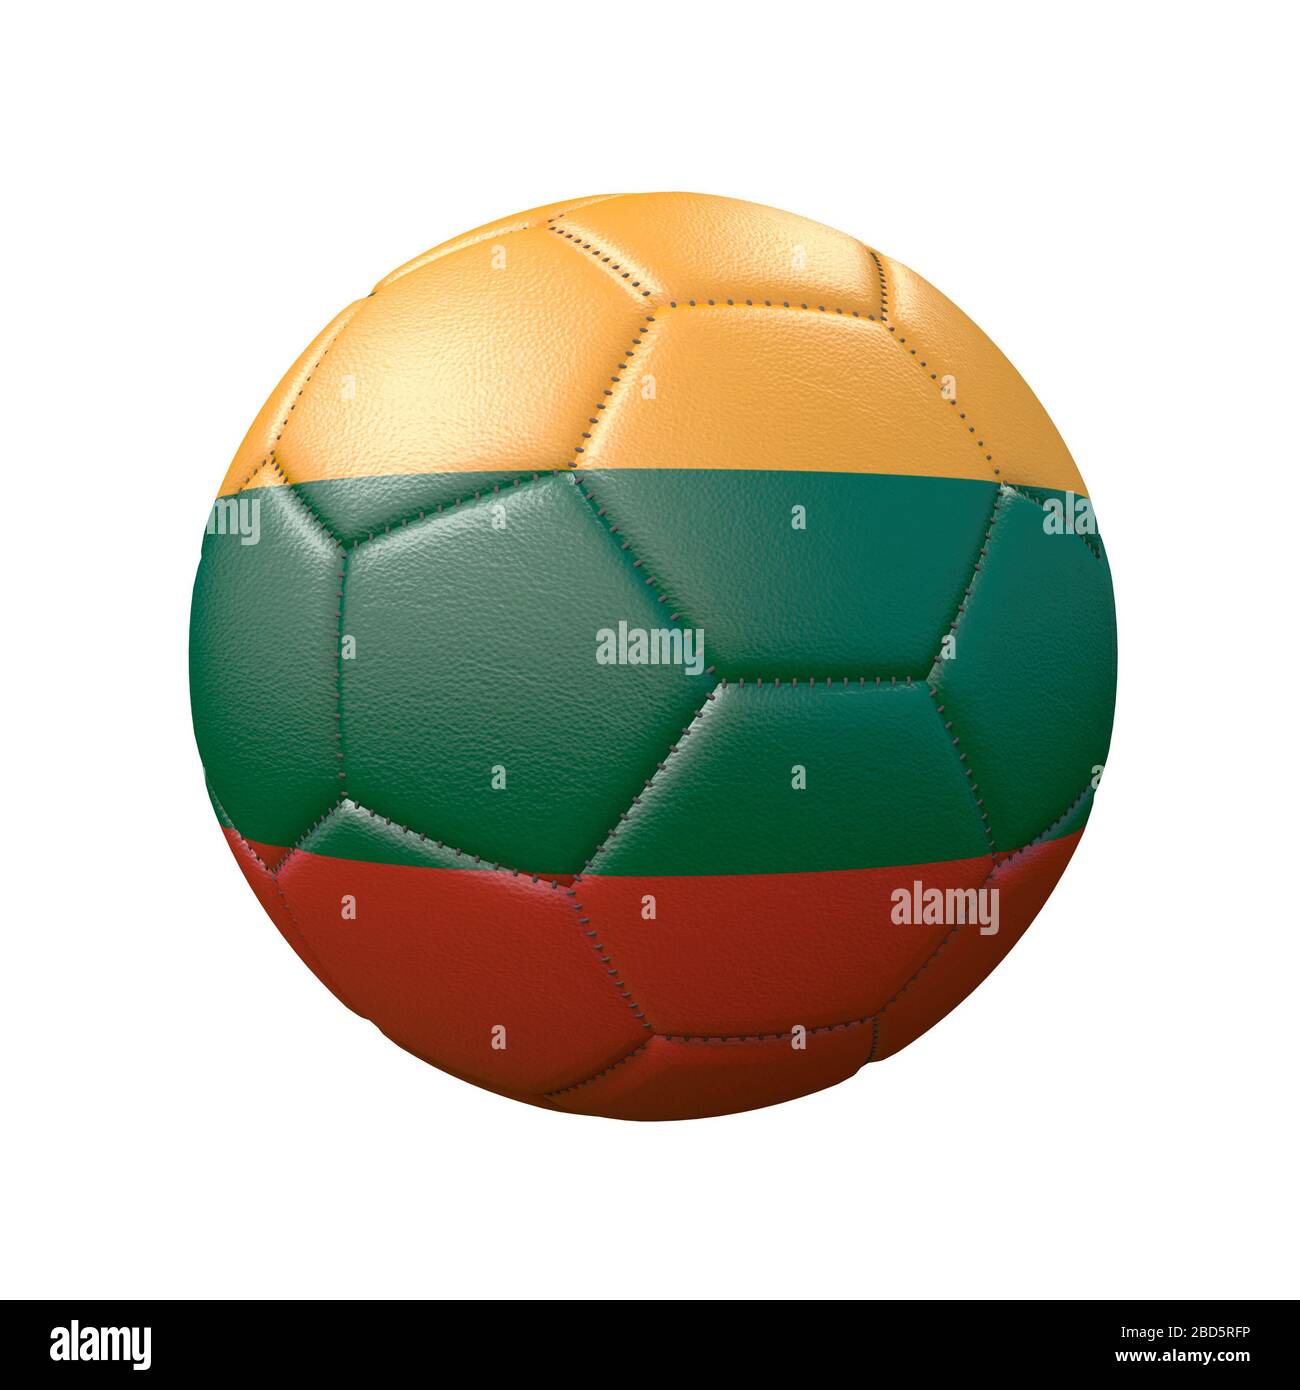 Soccer ball in flag colors isolated on white background. Lithuania. 3D image Stock Photo